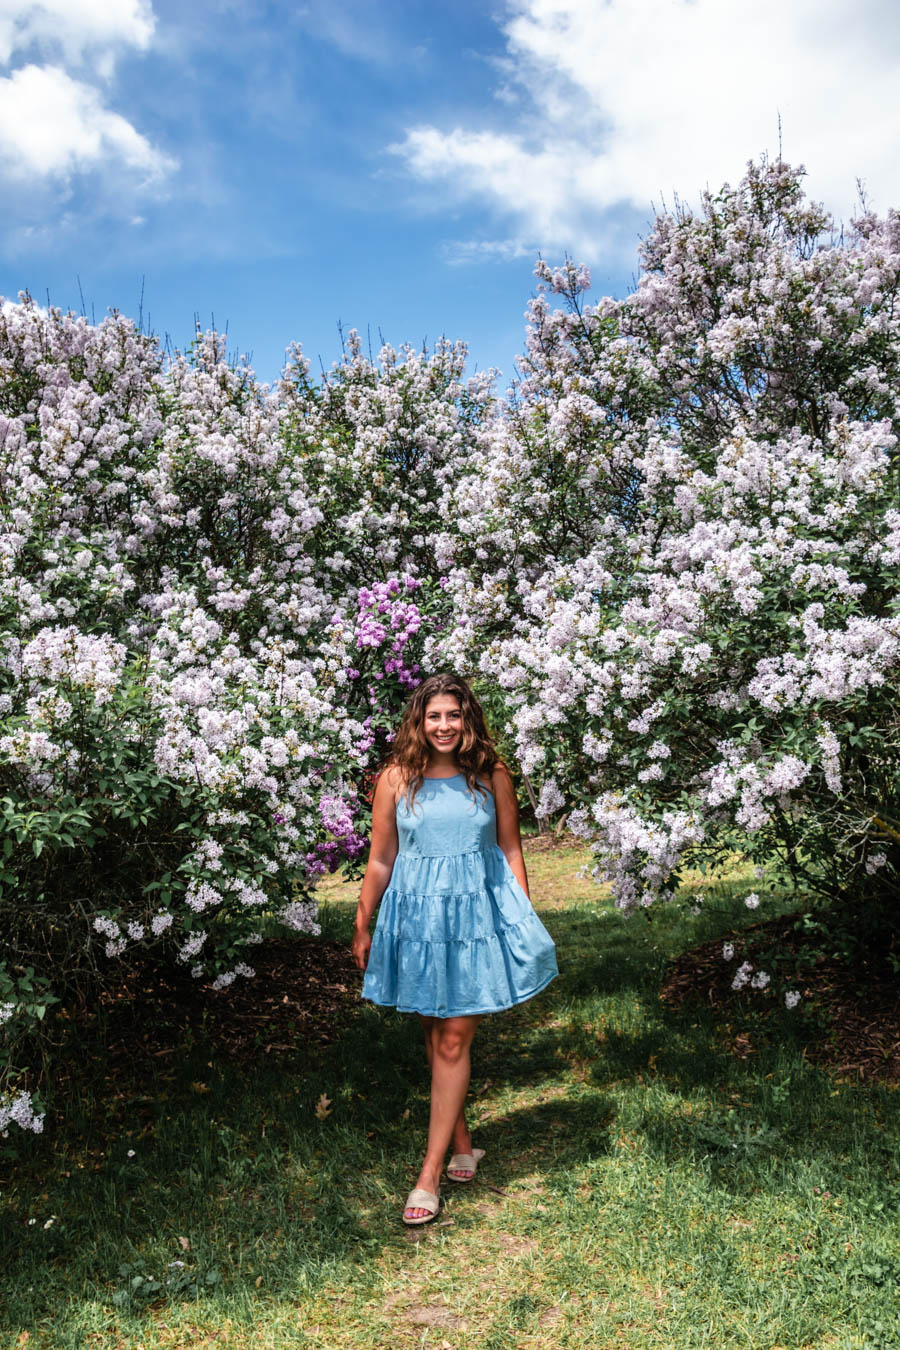 Highland Park Lilacs - Things to do in Rochester NY